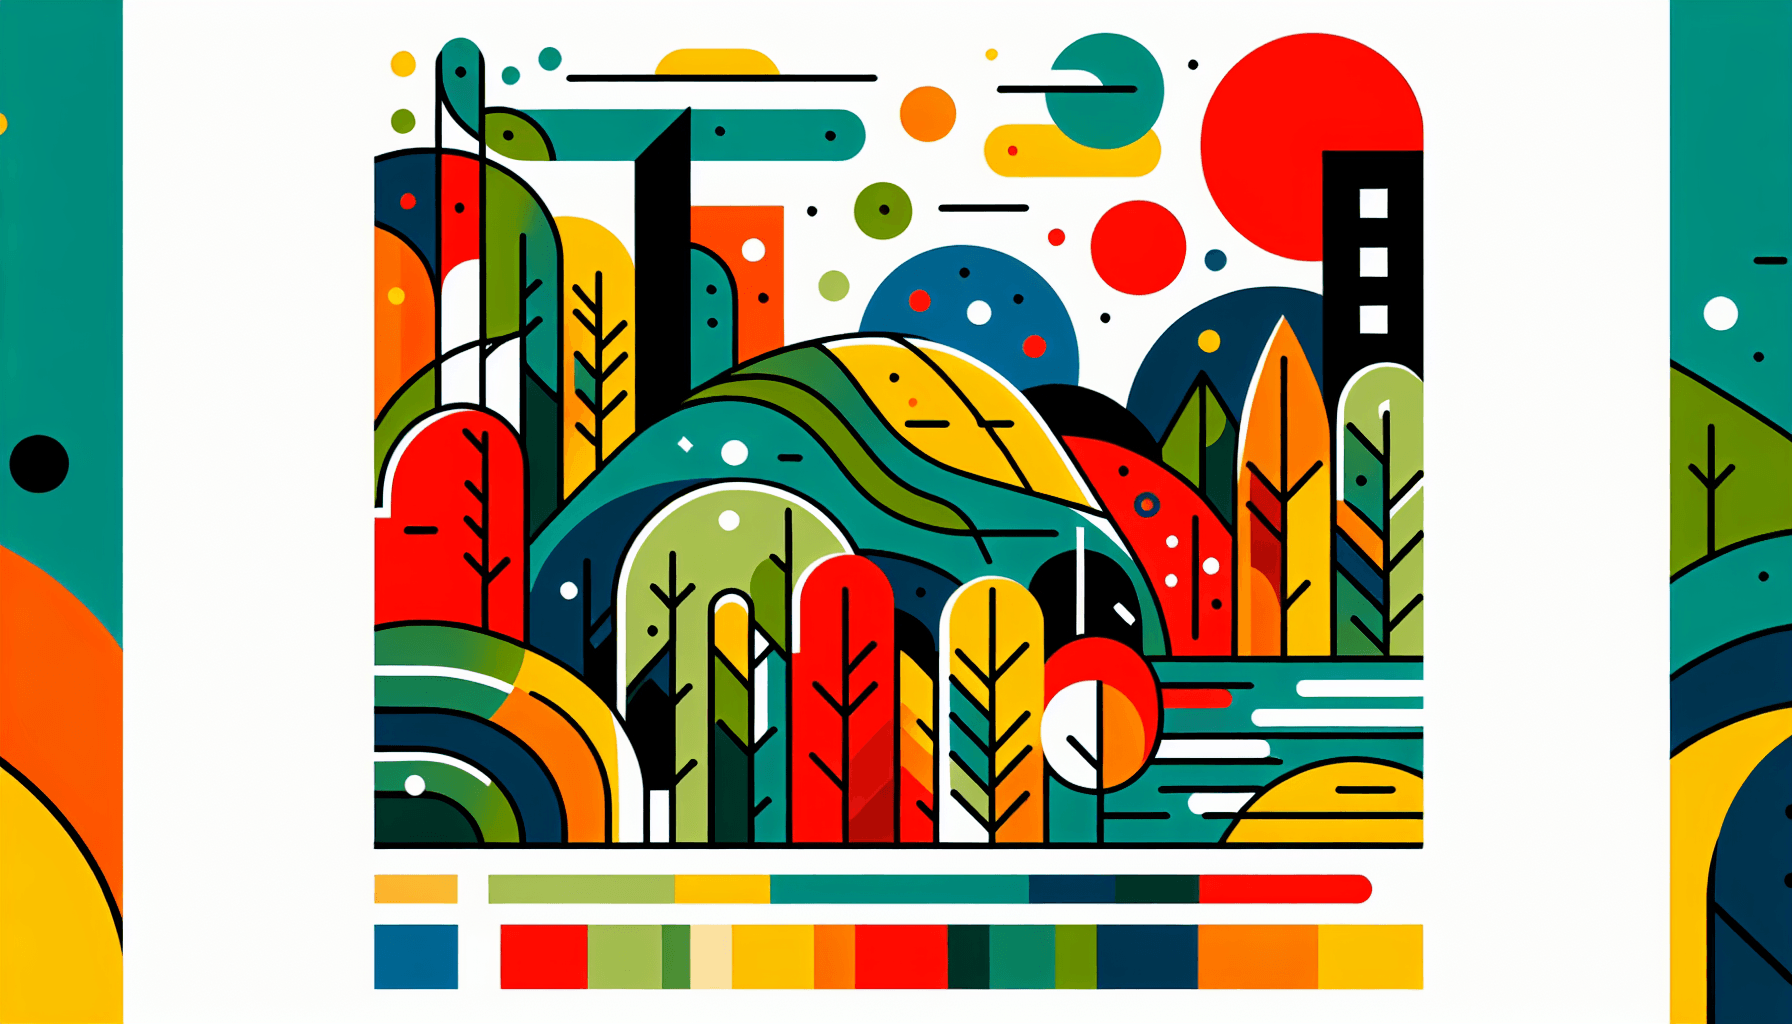 Innovation in flat illustration style and white background, red #f47574, green #88c7a8, yellow #fcc44b, and blue #645bc8 colors.